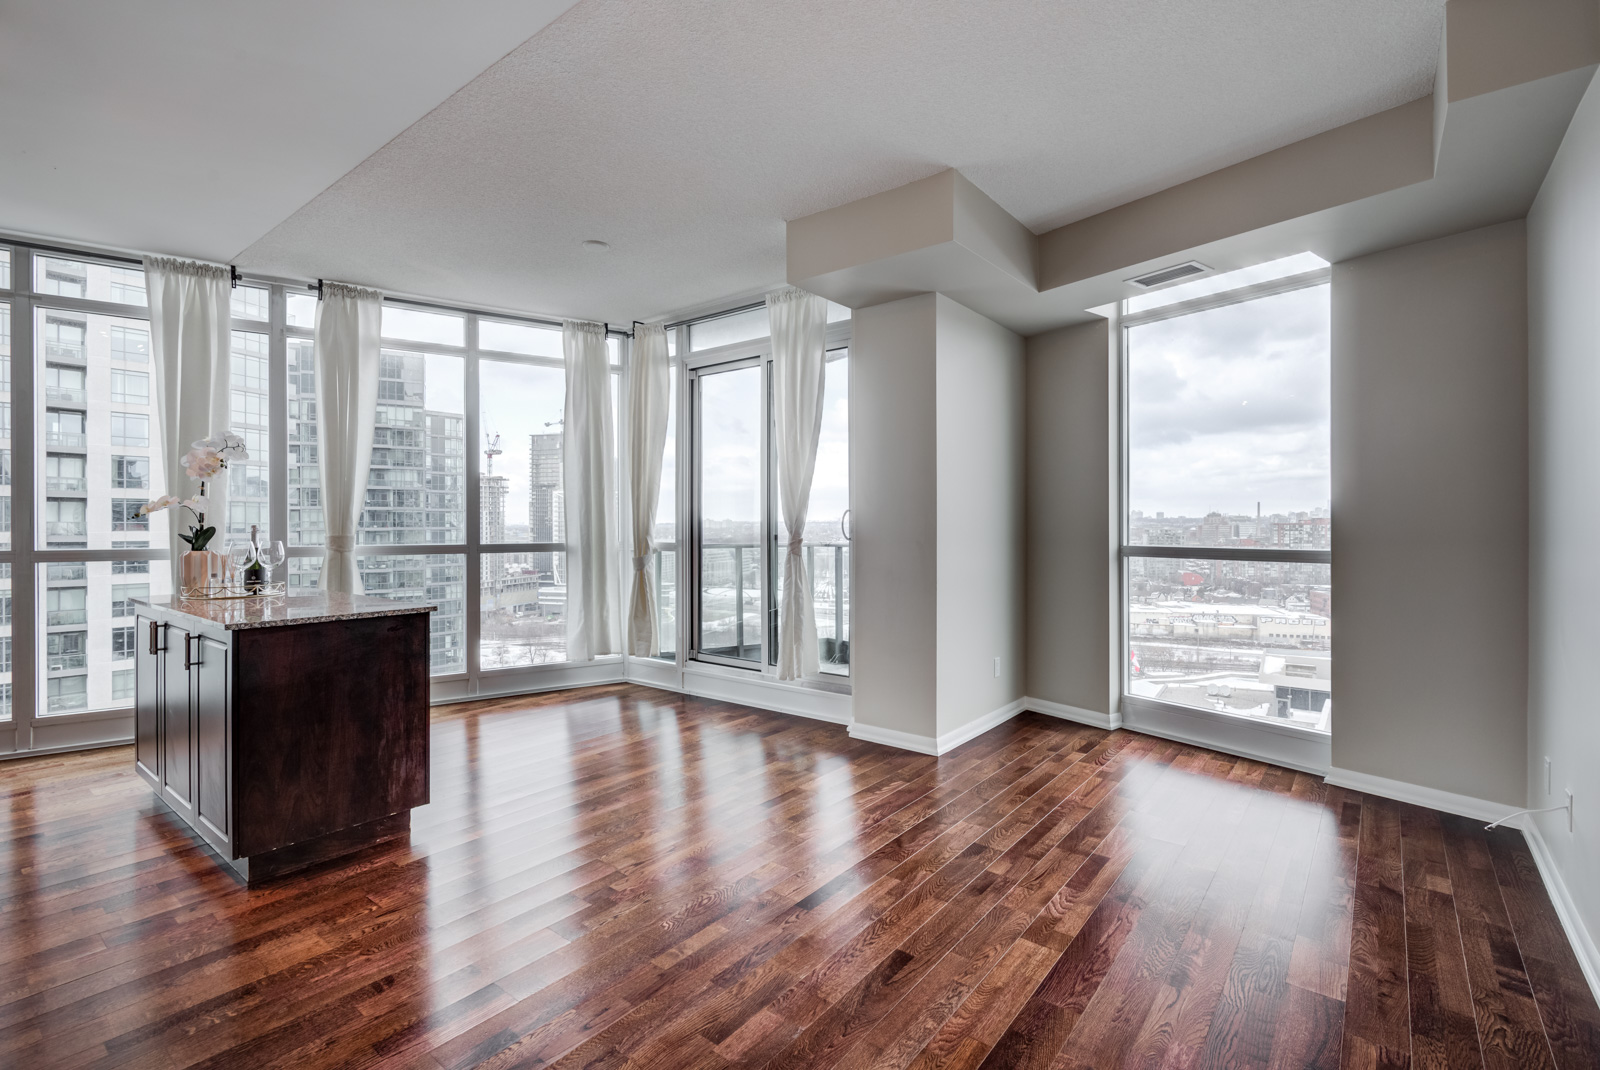 Empty condo unit of 215 Fort York Blvd with kitchen island, dark hardwood floors and several large windows.